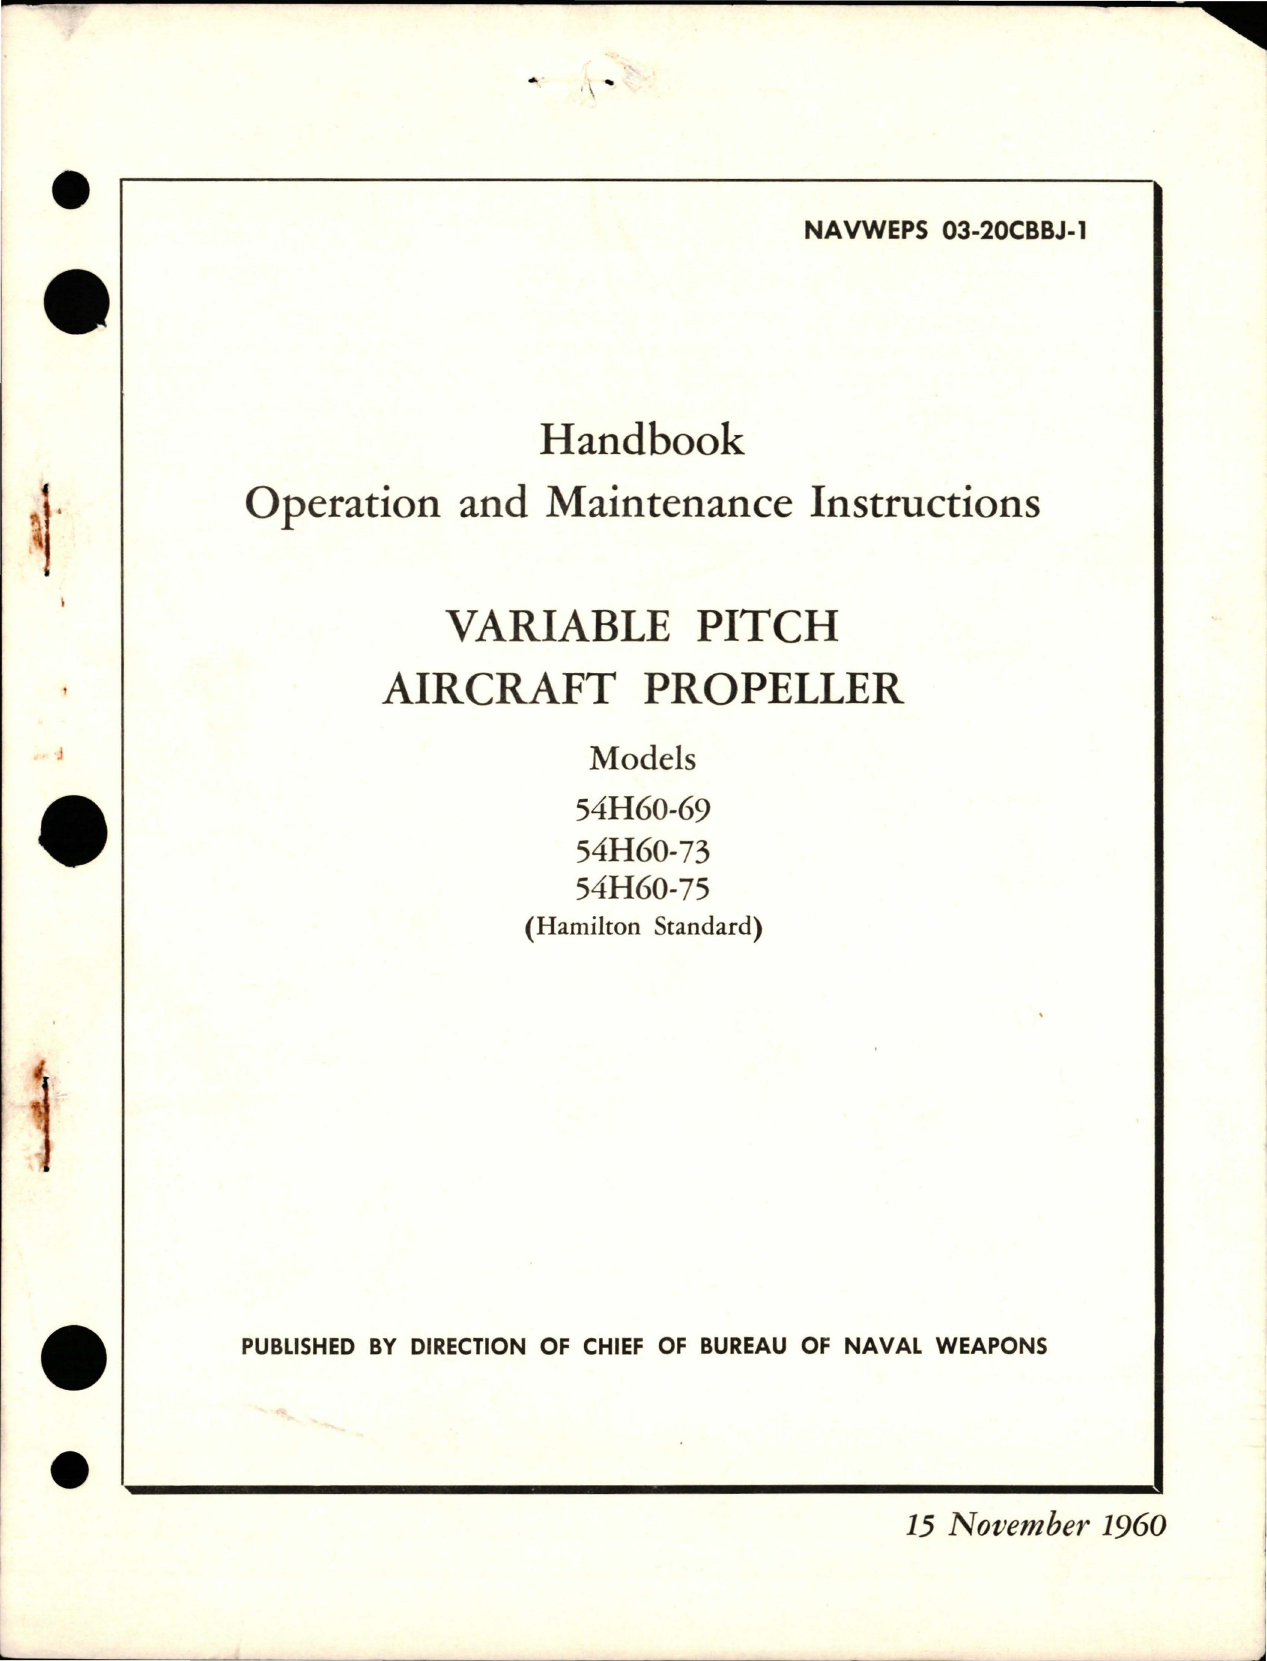 Sample page 1 from AirCorps Library document: Operation and Maintenance Instructions for Variable Pitch Propeller - Models 54H60-69, 54H60-73, and 54H60-75